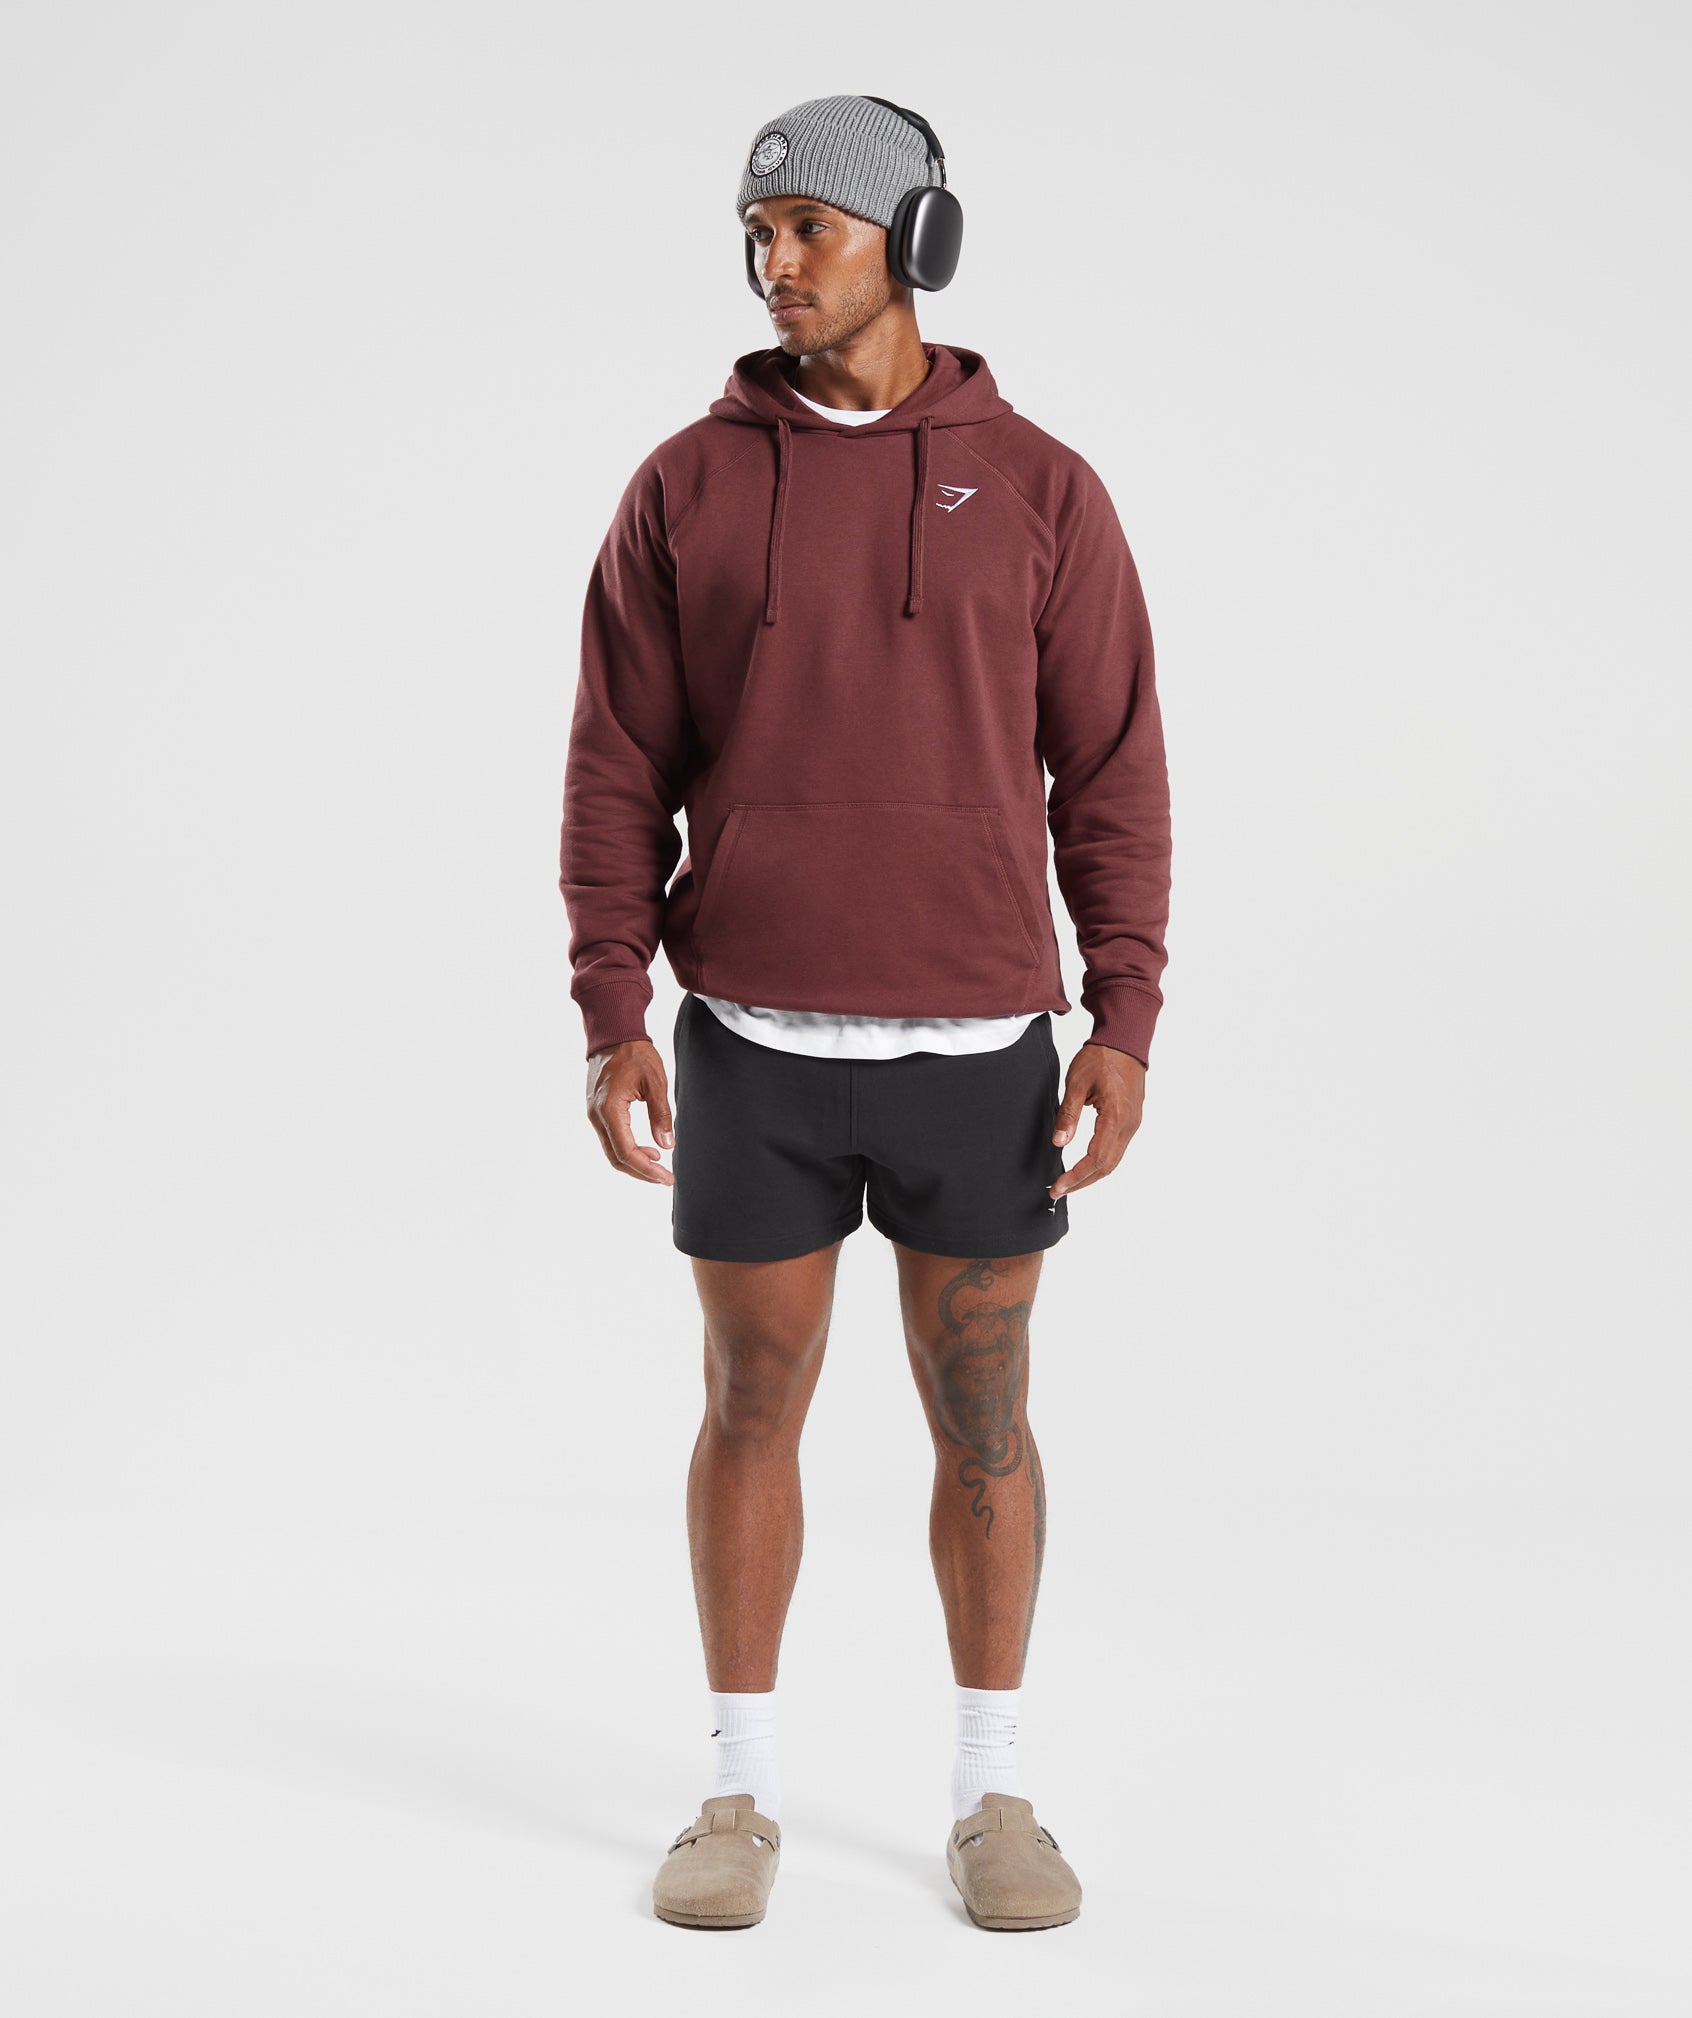 Crest Hoodie in Washed Burgundy - view 4